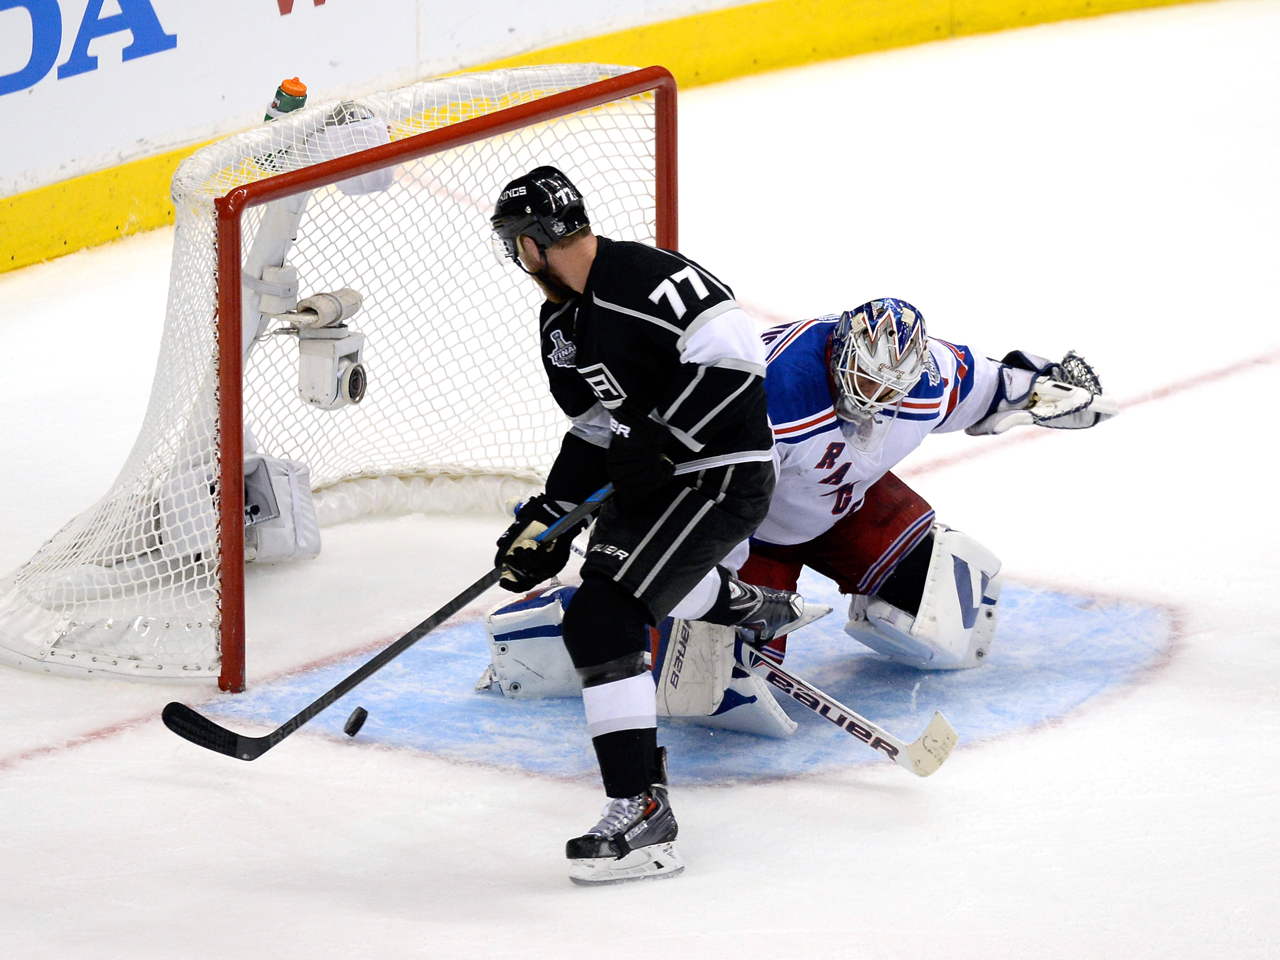 L.A. Kings win 2014 Stanley Cup - CBS News